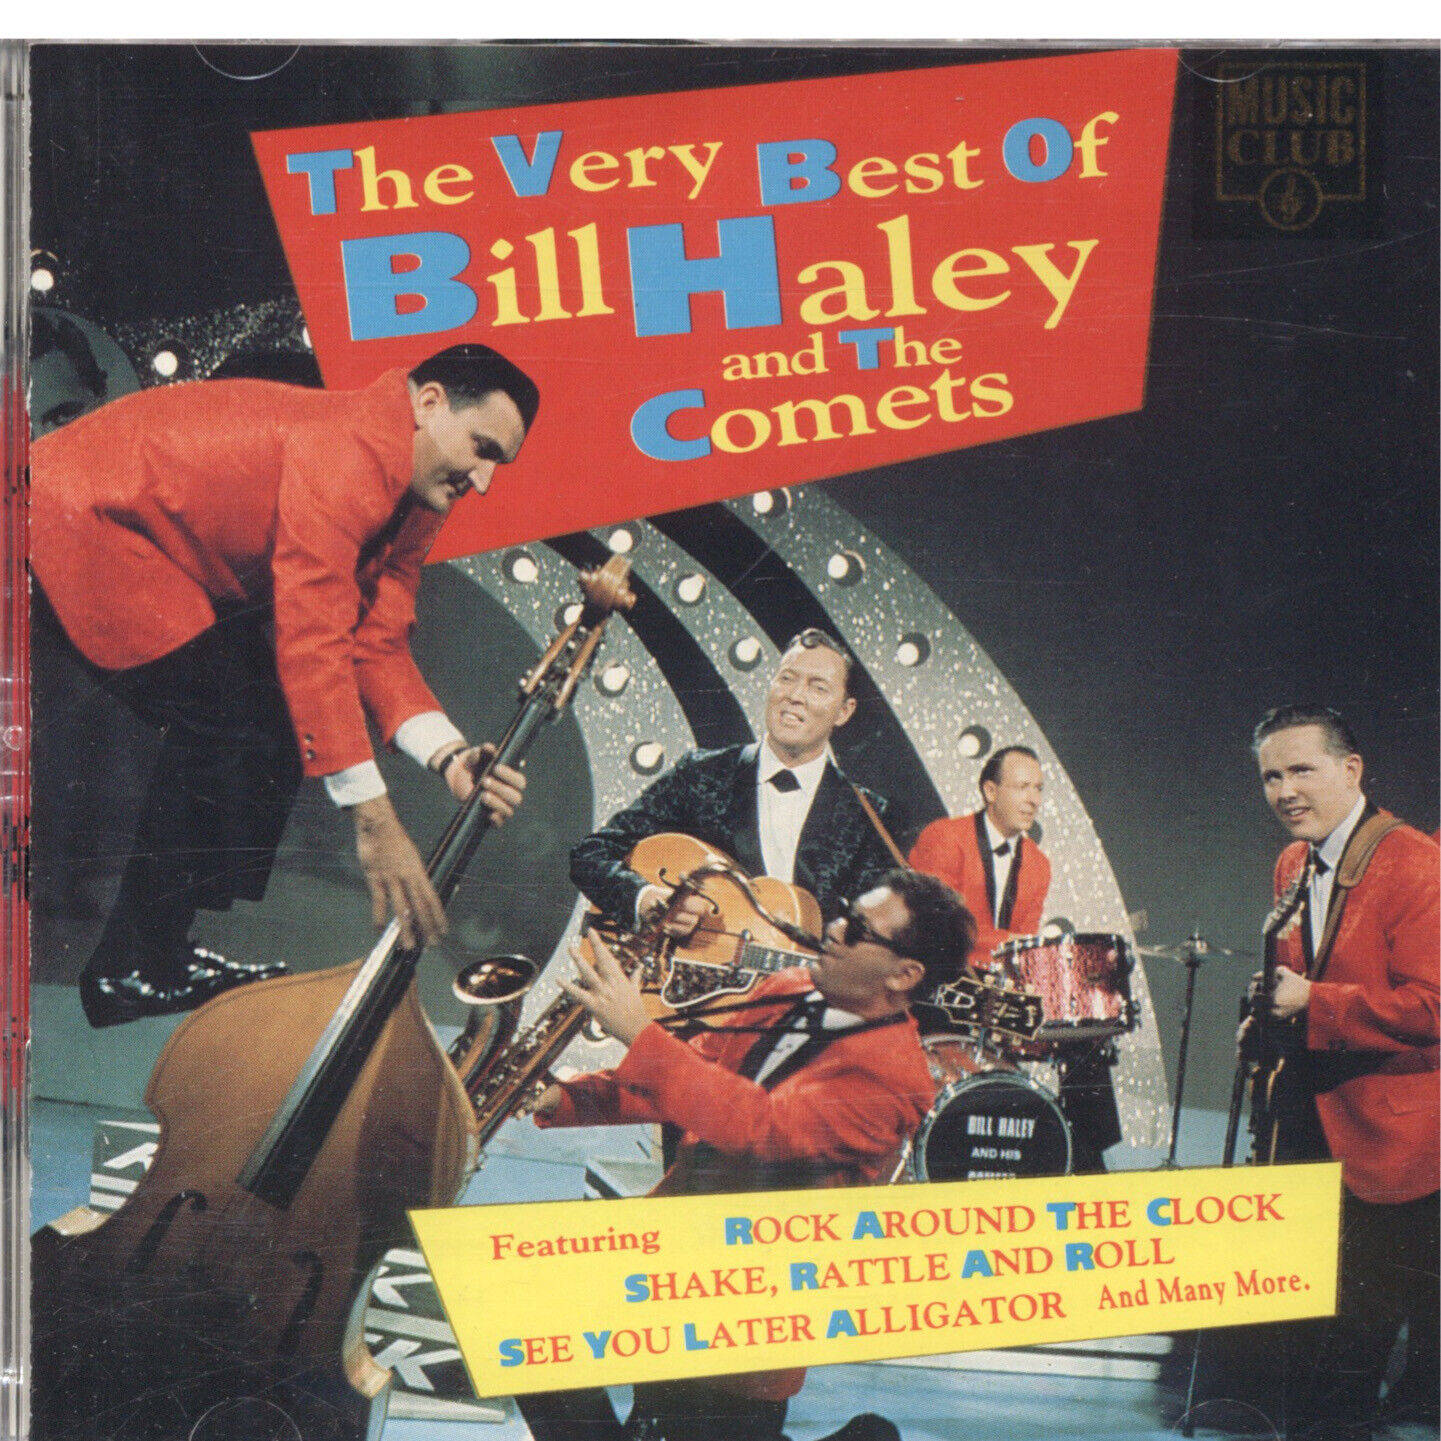 Vintage 'Bill Haley And The Comets' Album Cover Wallpaper